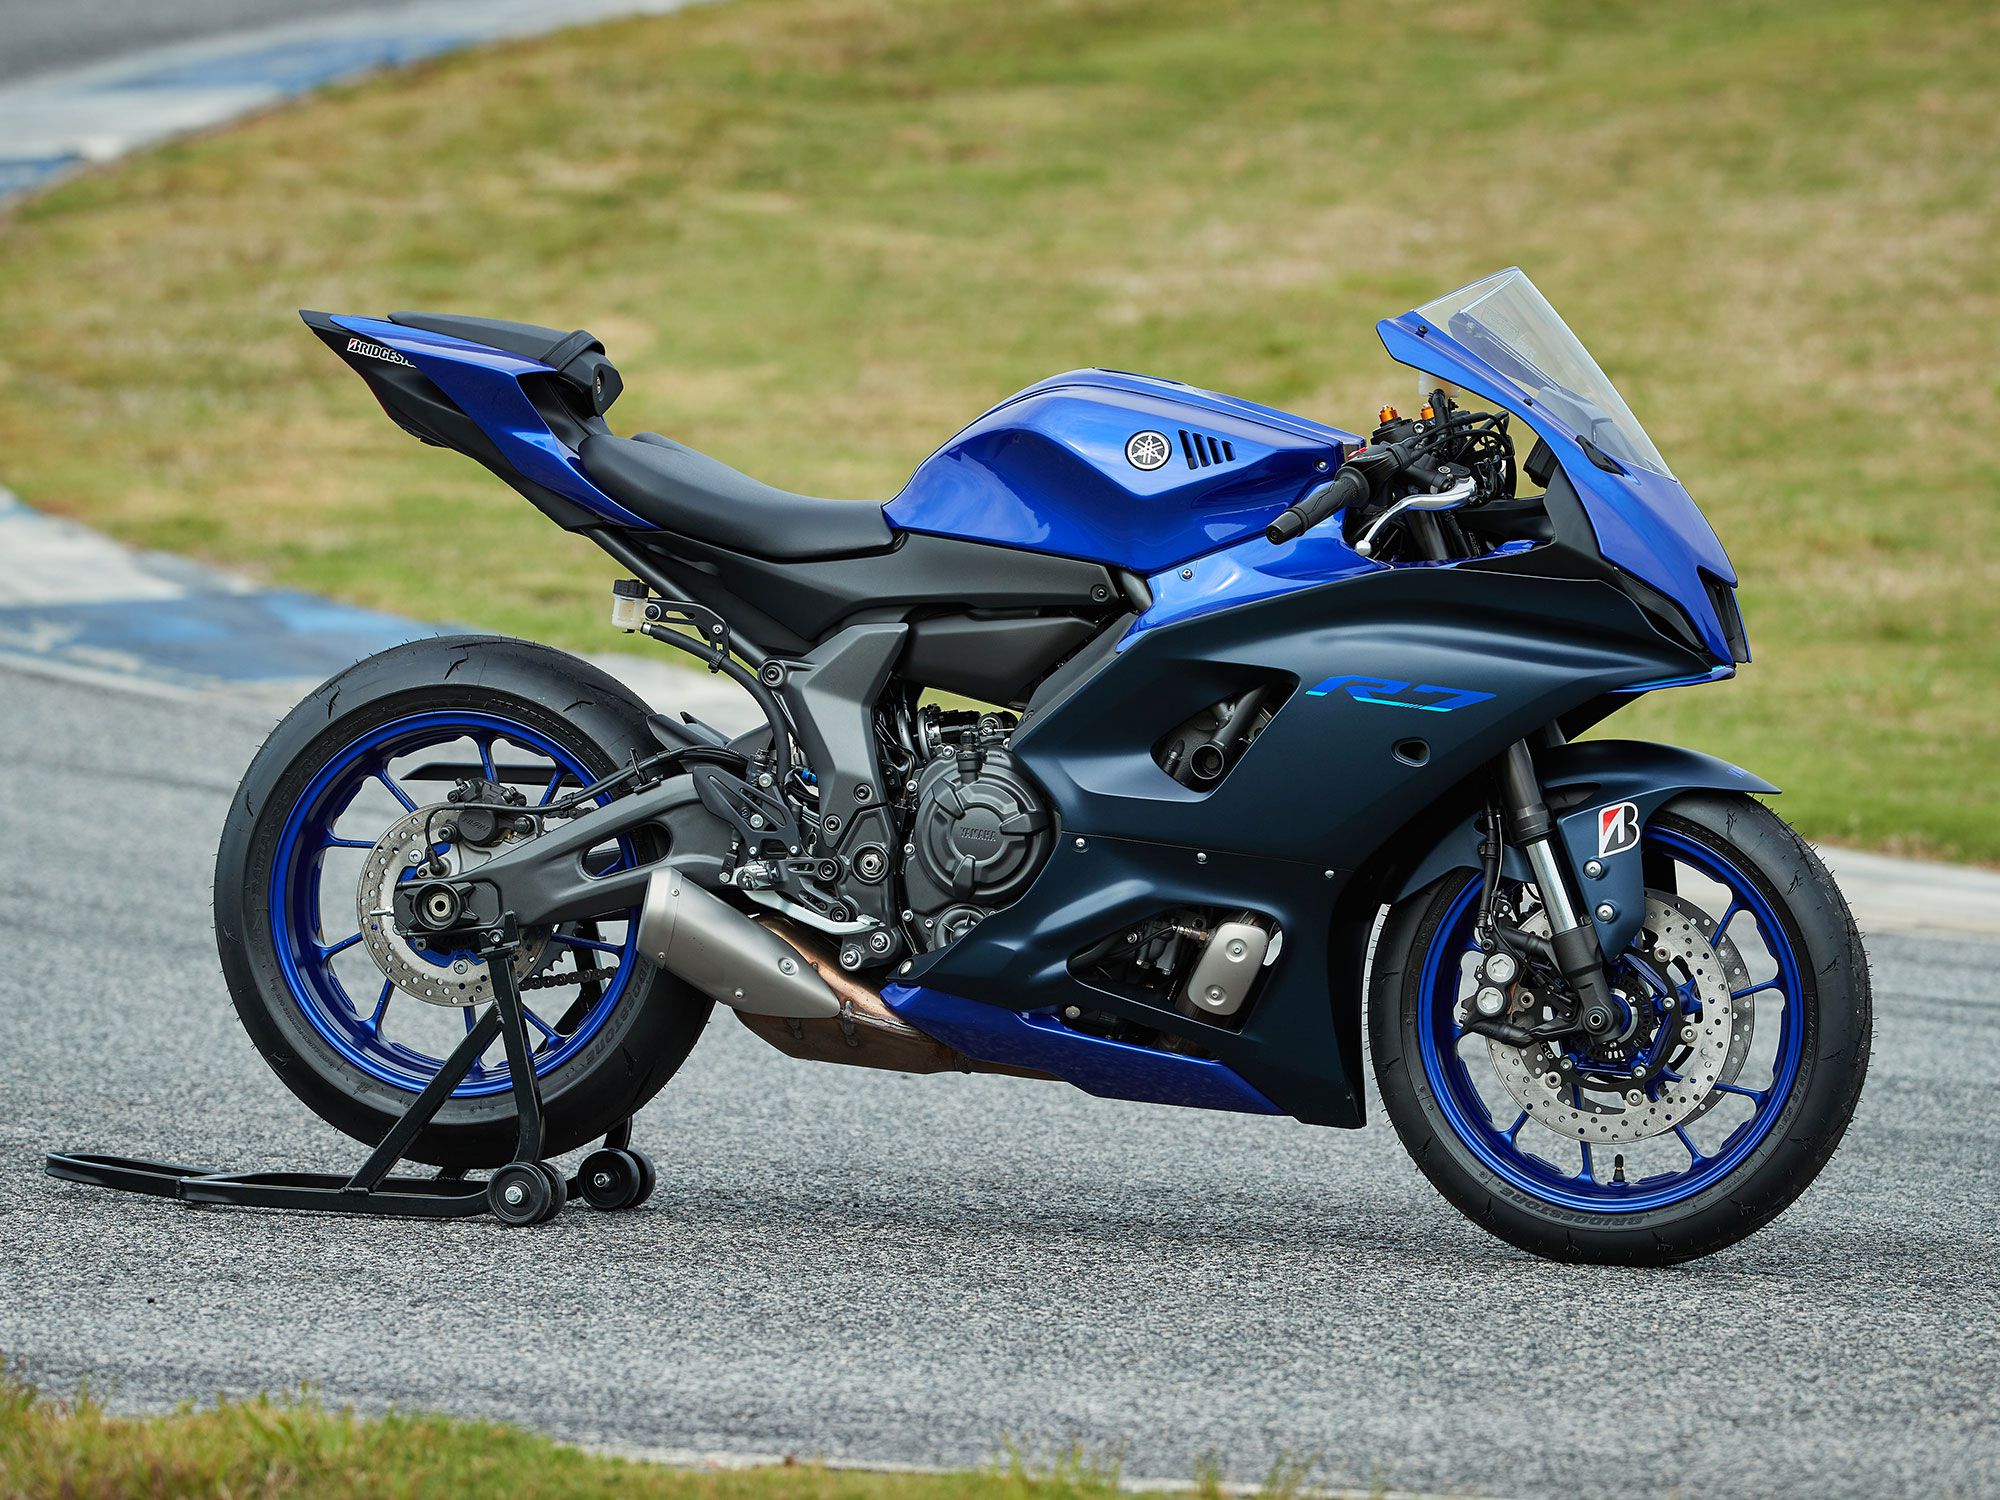 Yamaha repurposes its MT-07 platform to create a new parallel-twin powered sportbike.